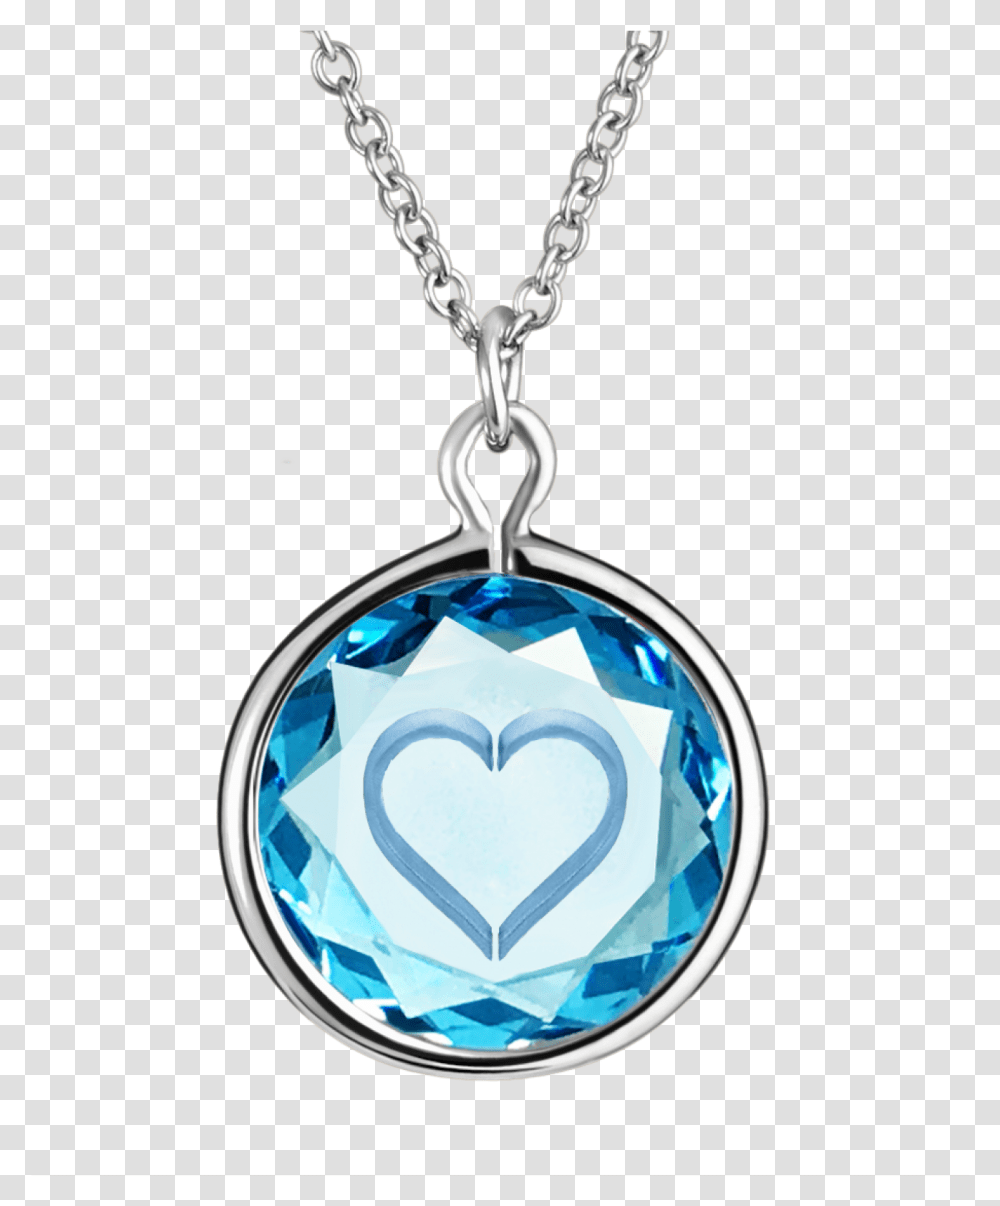 Heart Shape Engraved In Blue Swarovski Crystal With Necklace, Locket, Pendant, Jewelry, Accessories Transparent Png